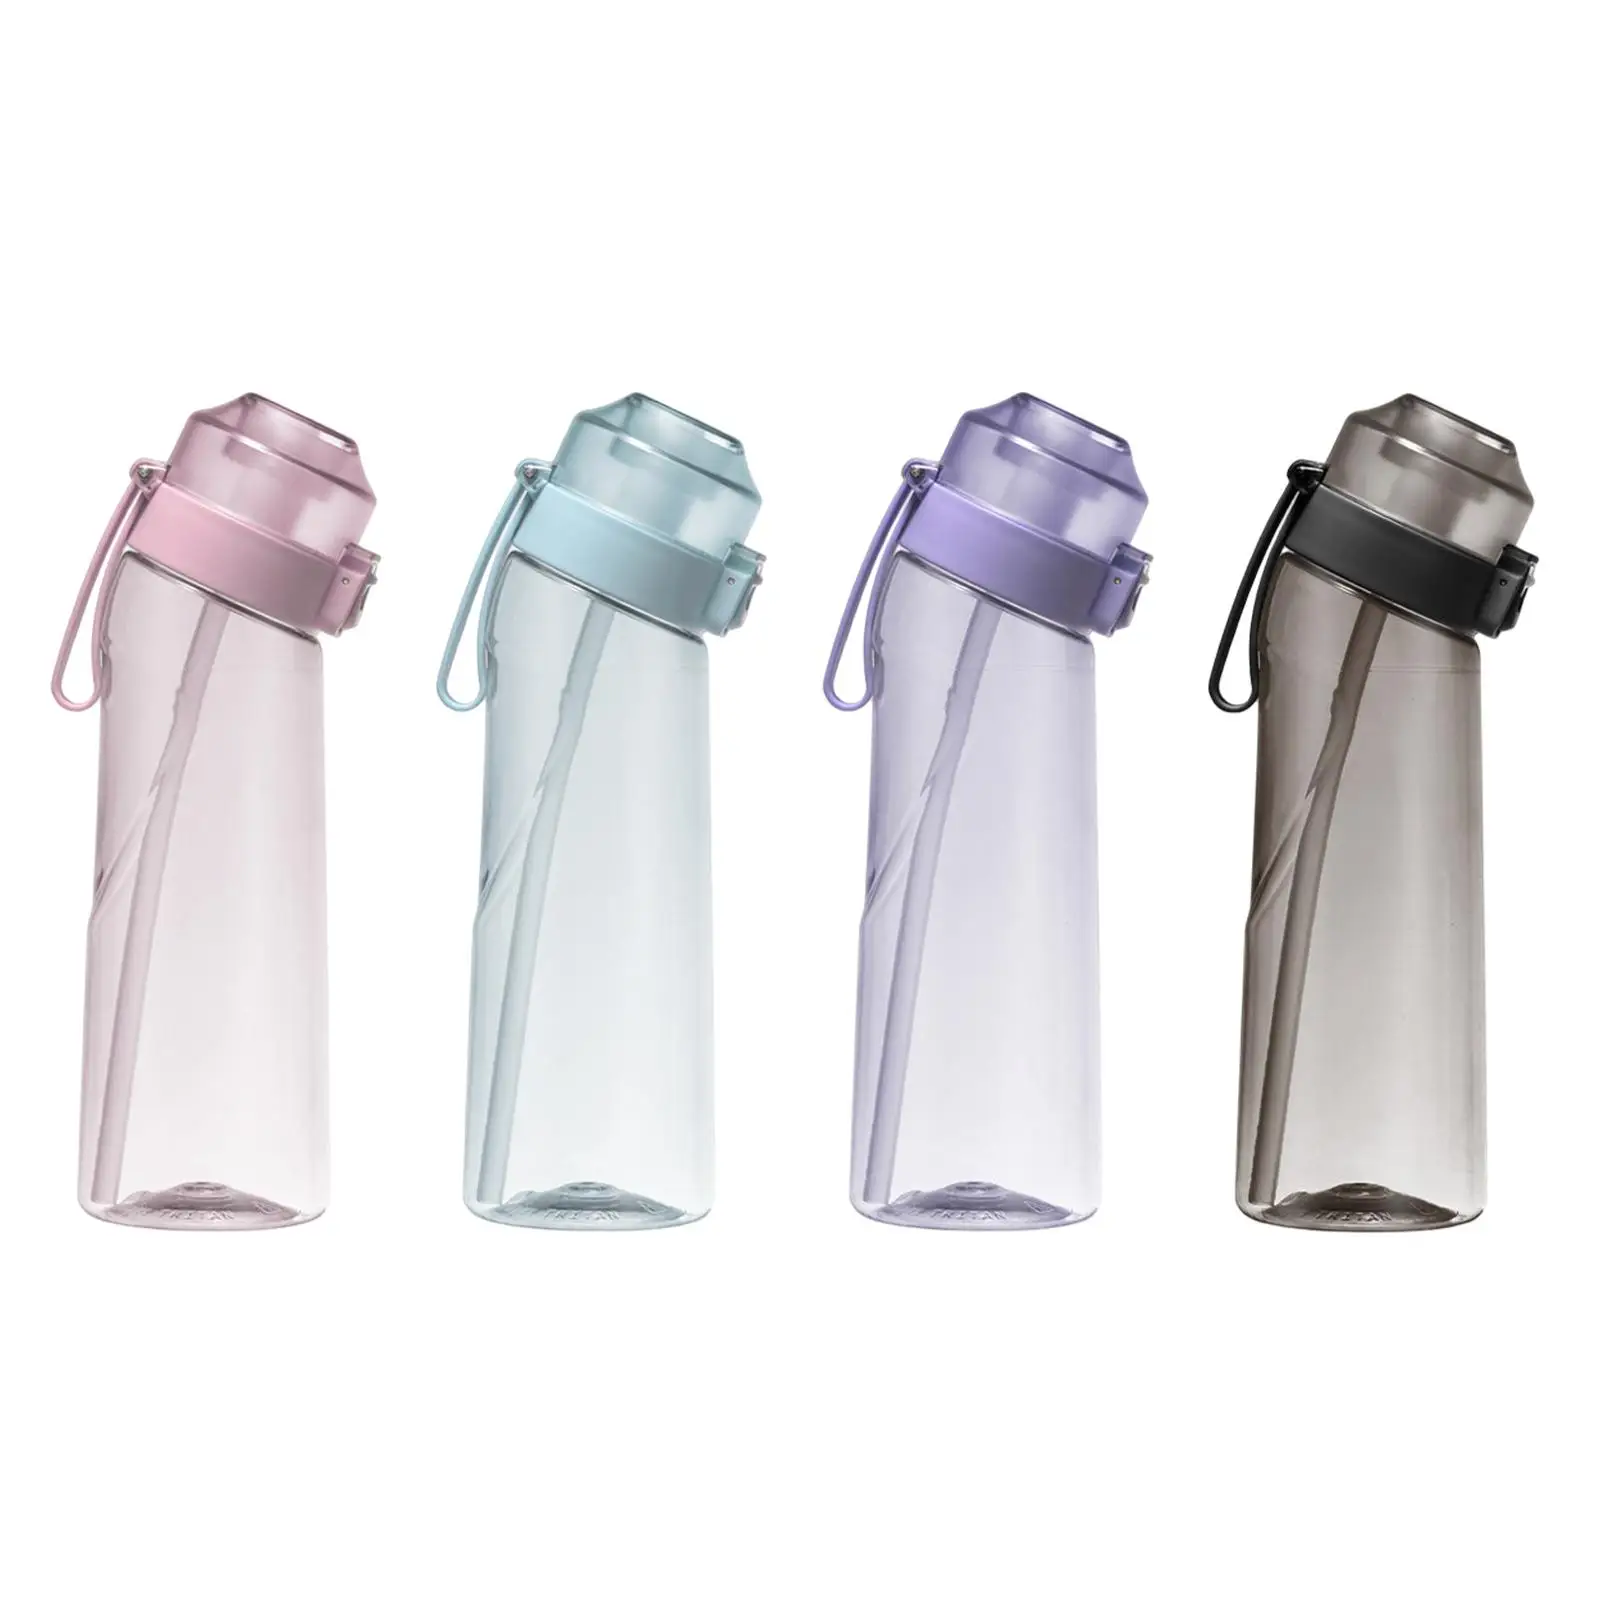 Portable Water Bottles, Sports Drinking Bottles, Ensure Drink Enough Water Throughout The Day for Workout